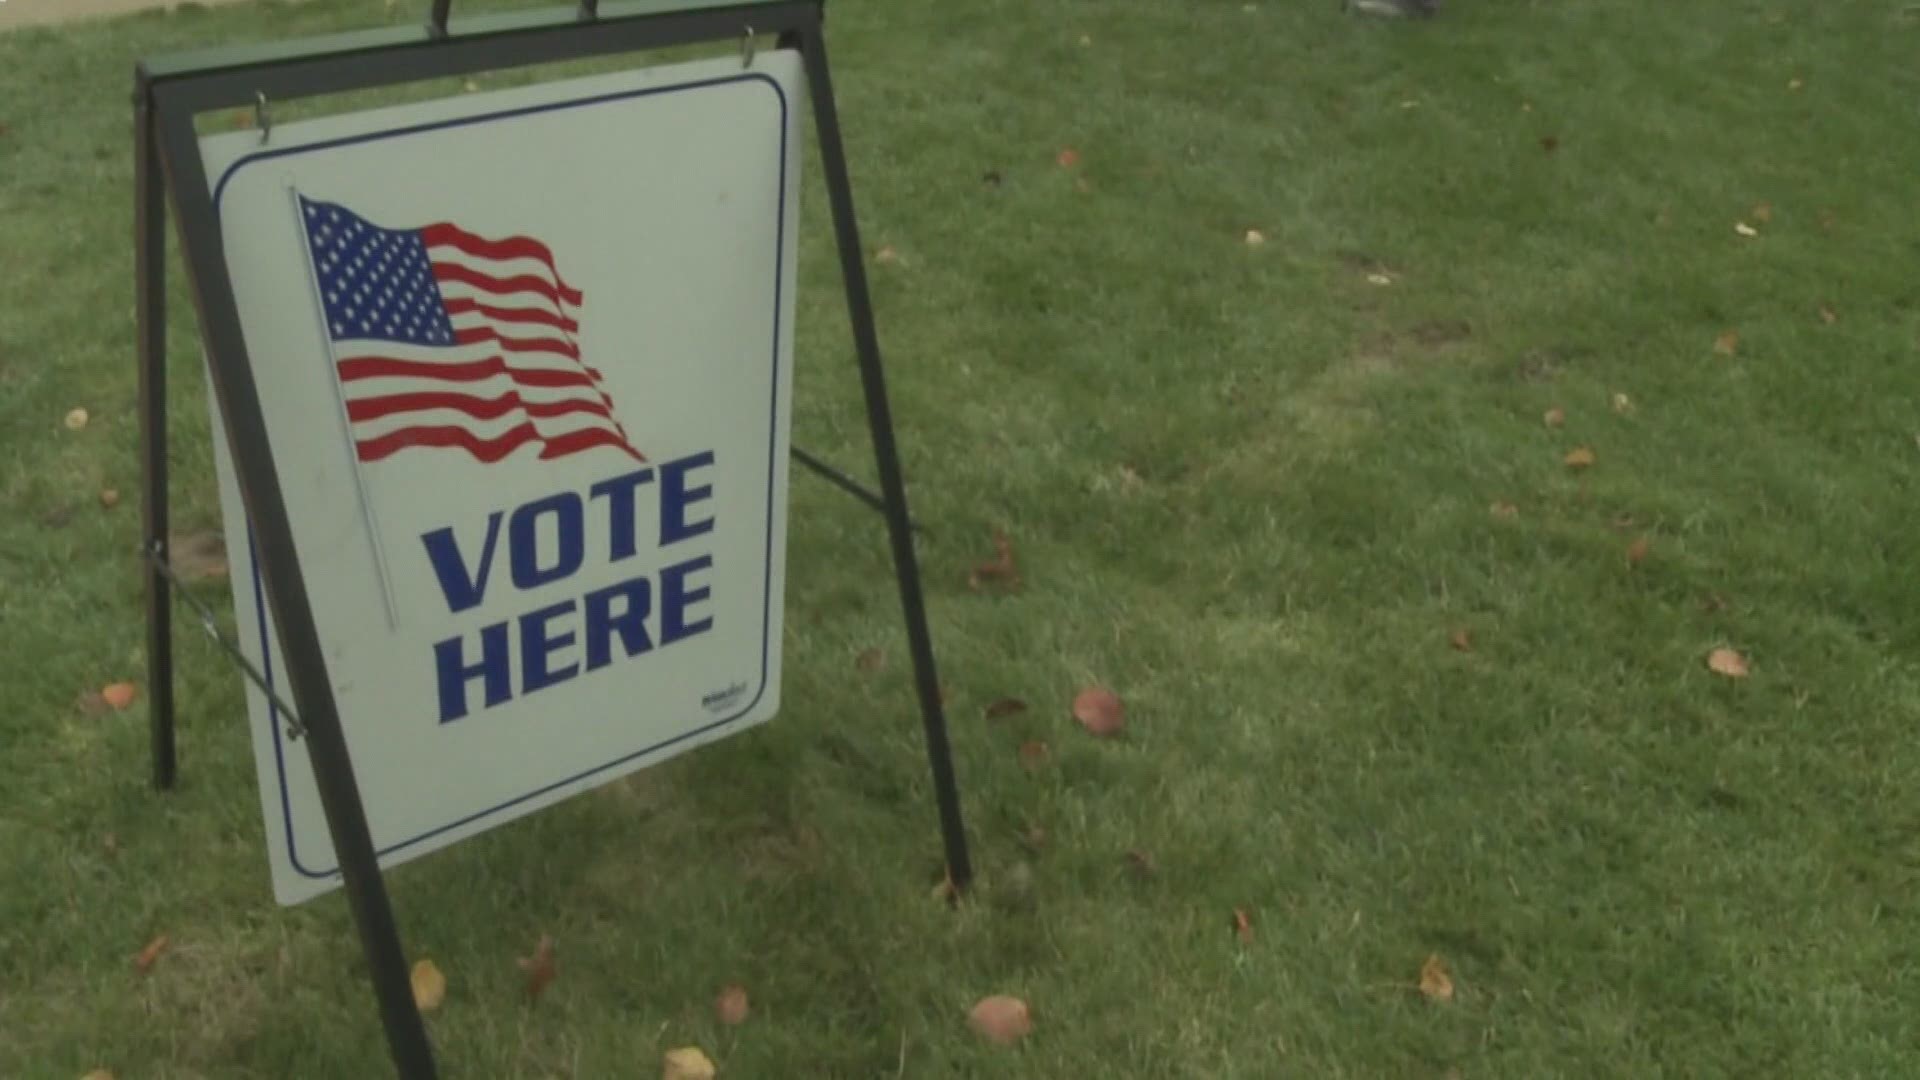 With Election Day fast approaching, voters rights advocates are doing everything they can to make sure every vote counts. Grand Rapids PROACTIVE is looking for po